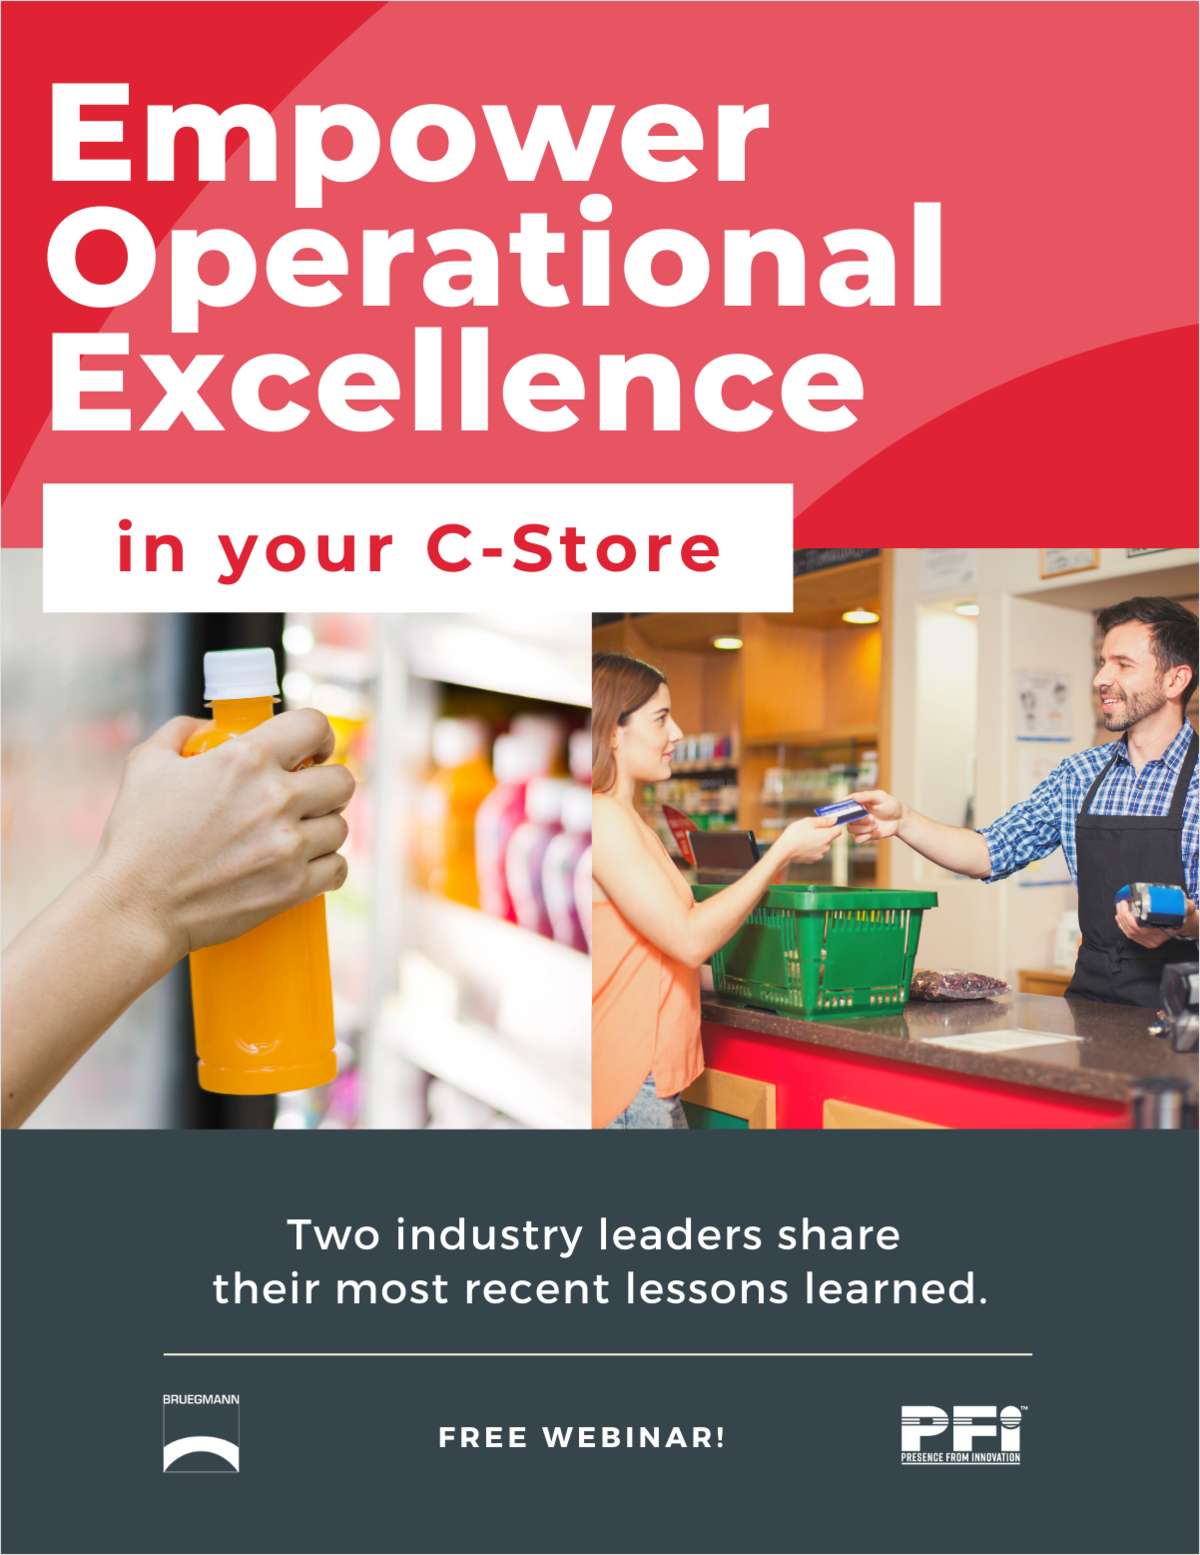 Empower operational excellence in your c-store.